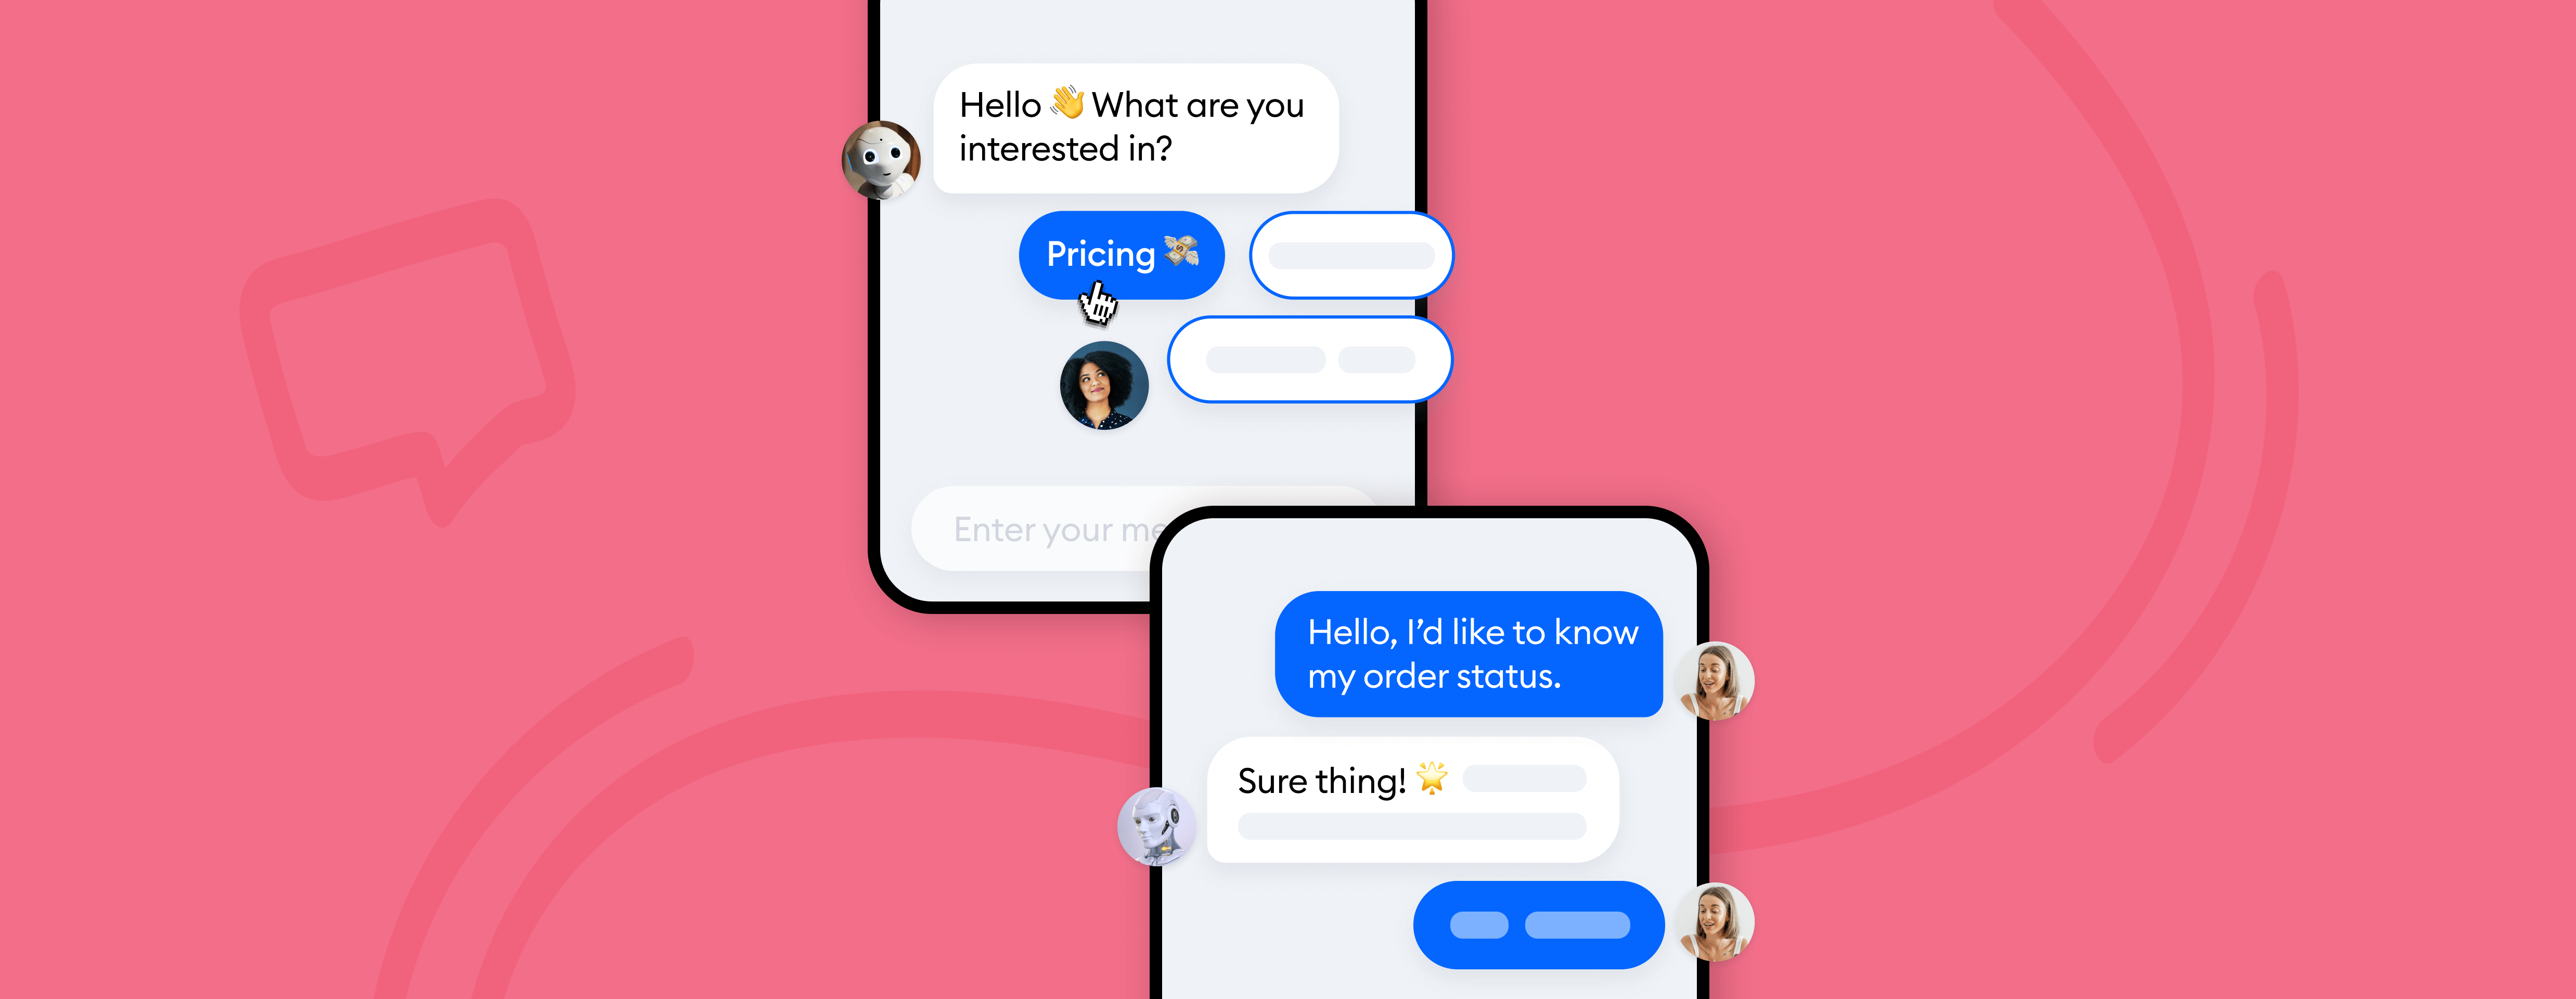 chatbot types cover image